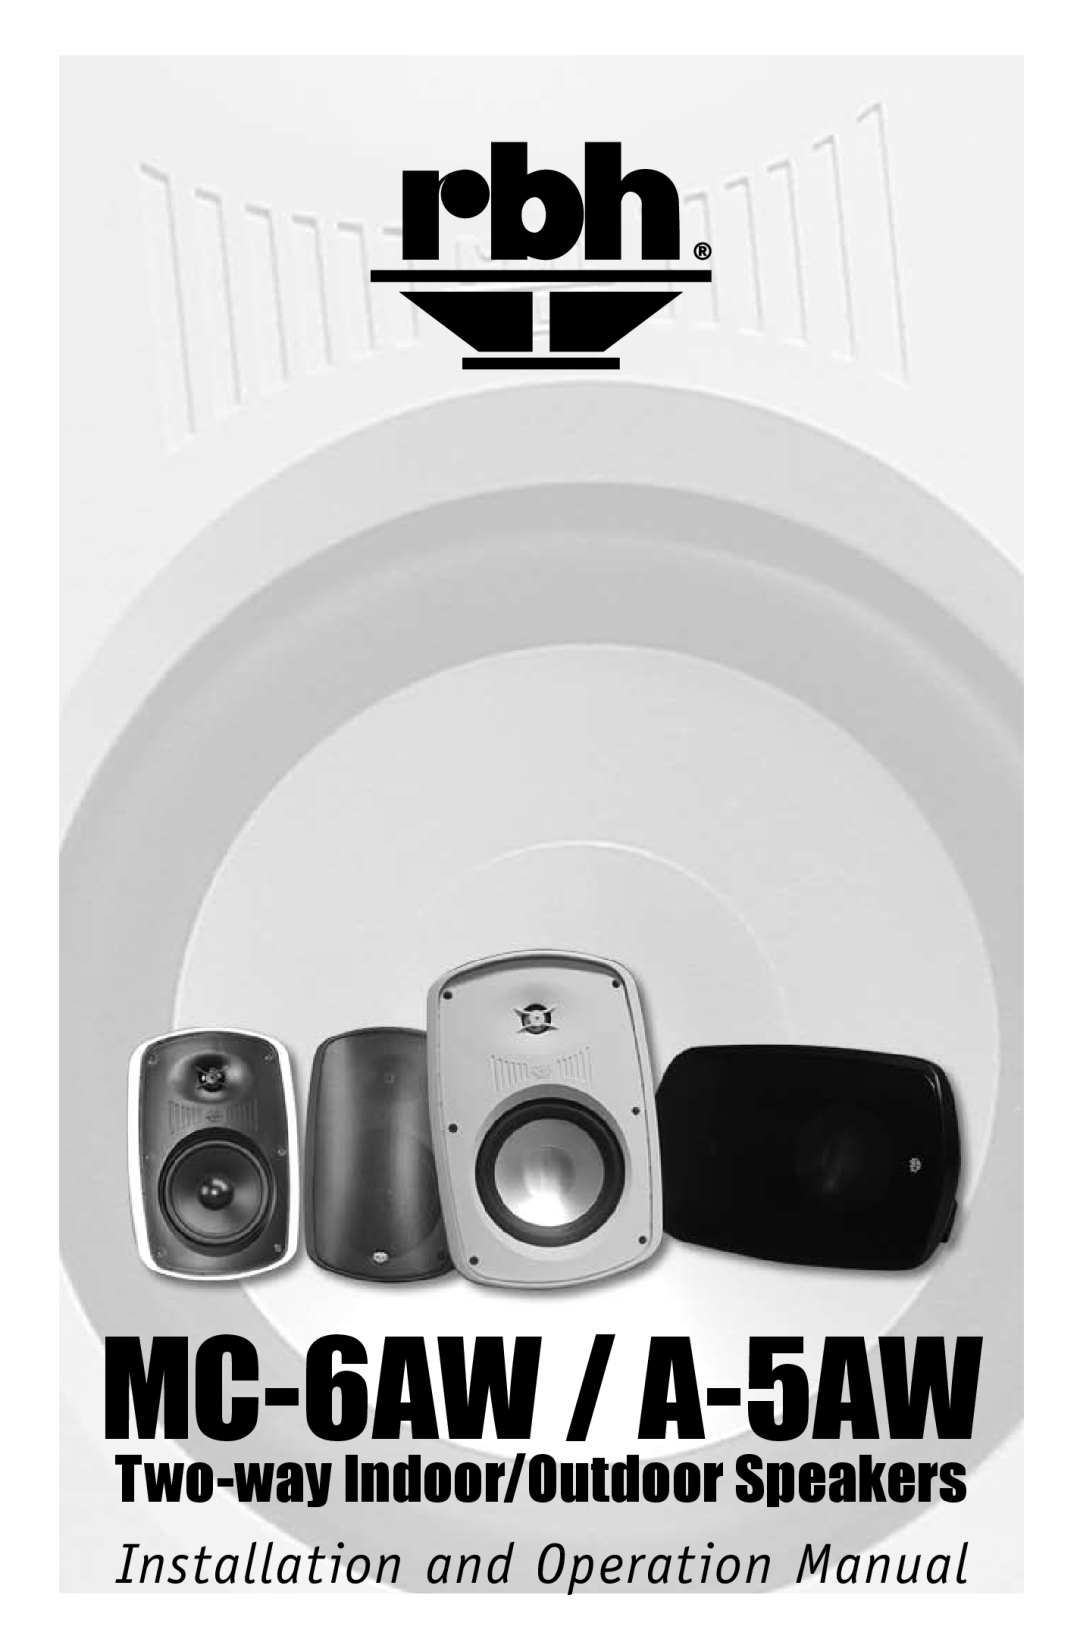 RBH Sound operation manual MC-6AW / A-5AW, Two-wayIndoor/Outdoor Speakers 